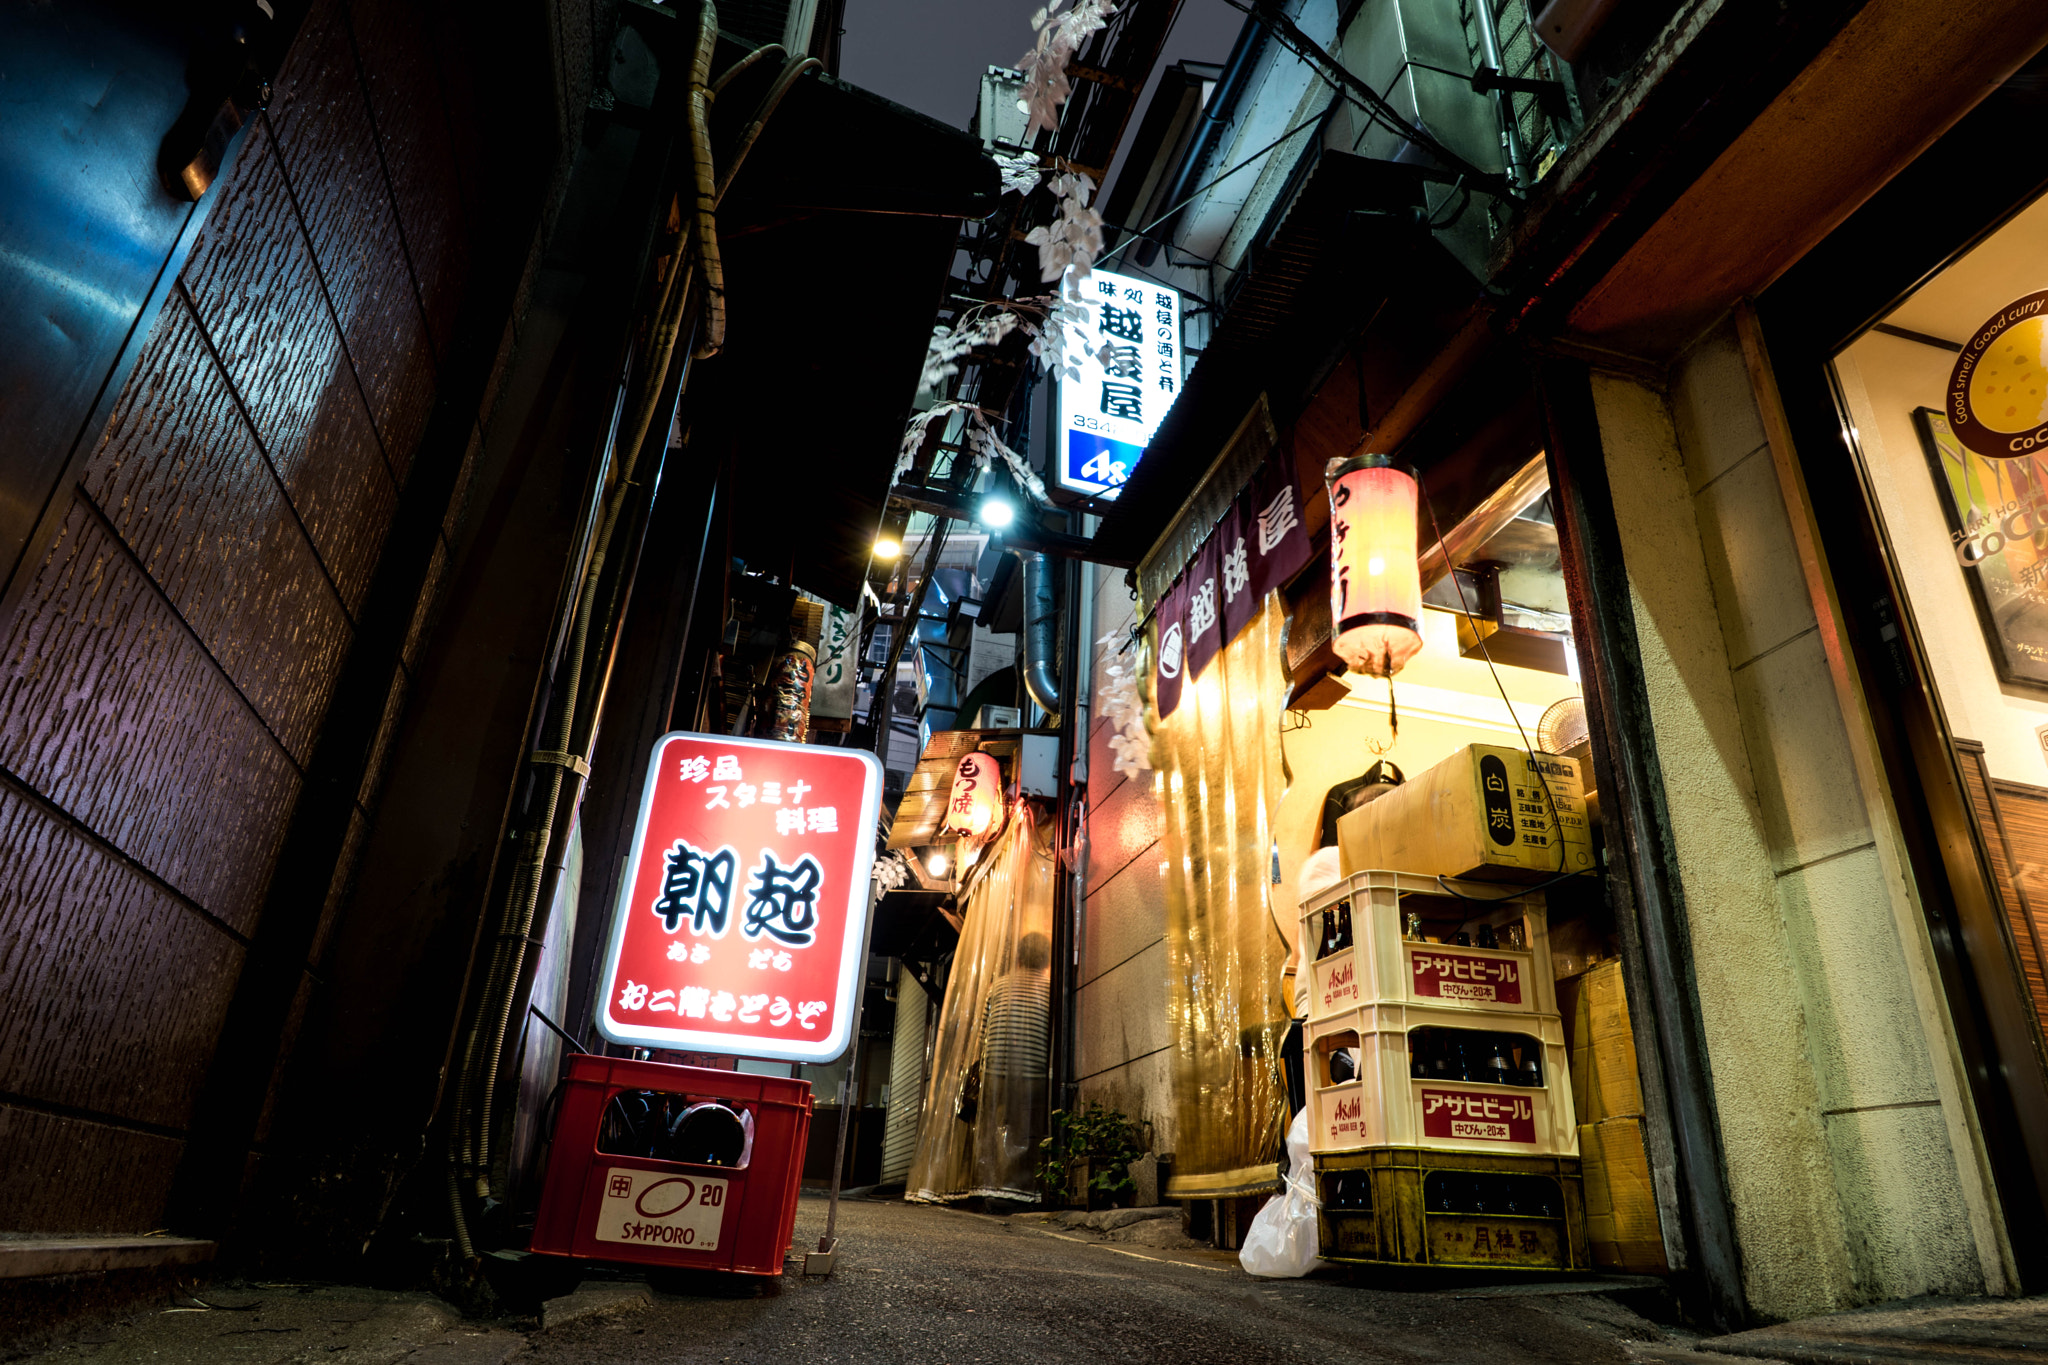 Sony a7 II + FE 21mm F2.8 sample photo. The quiet alley photography